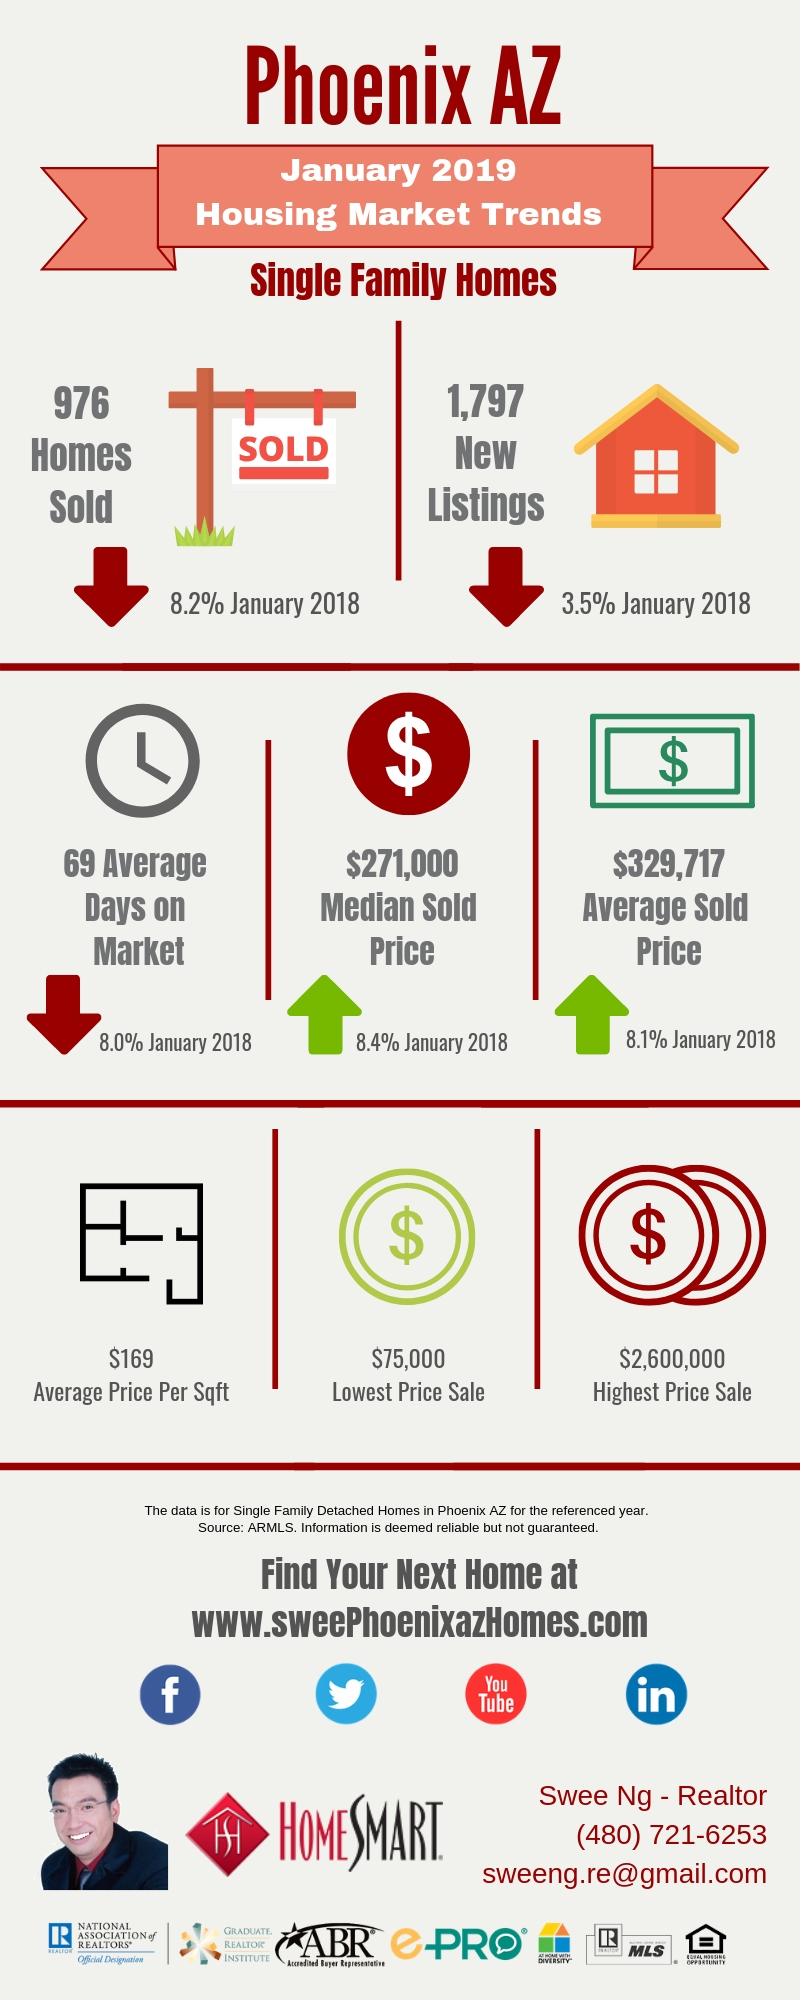 Phoenix AZ Housing Market Trends Report January 2019 by Swee Ng